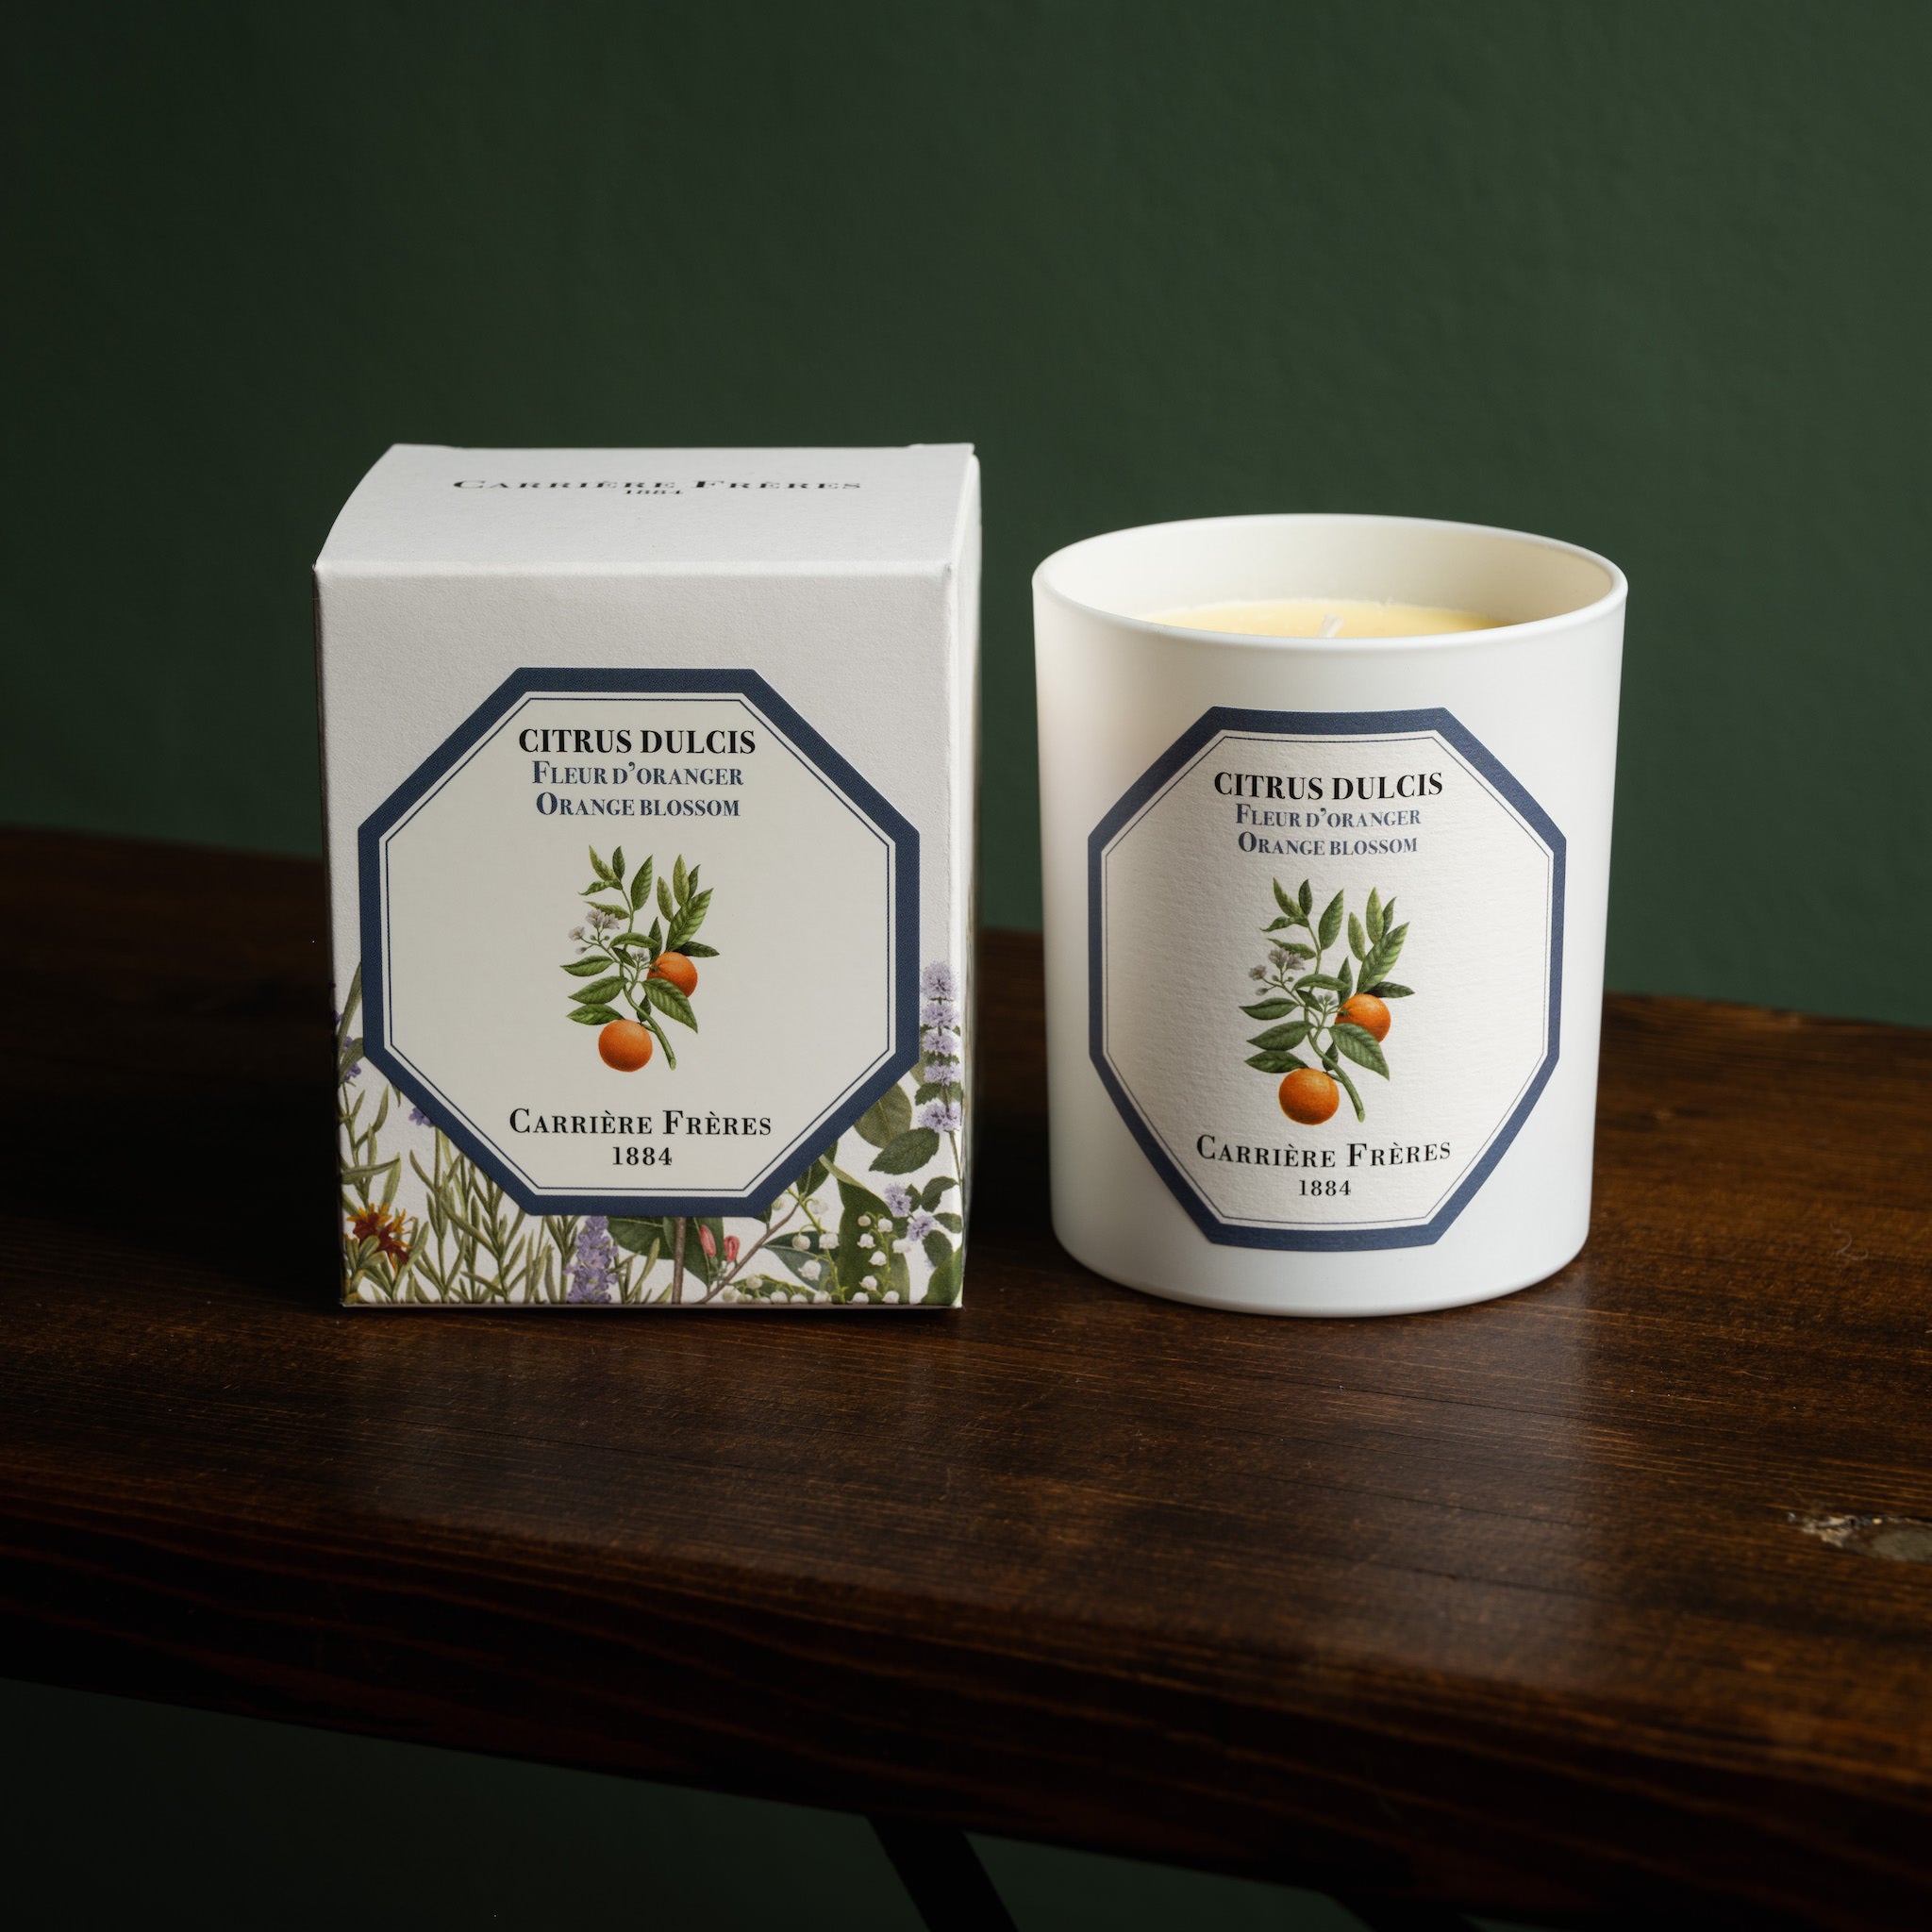 Carriere Freres Orange Blossom Candle & box